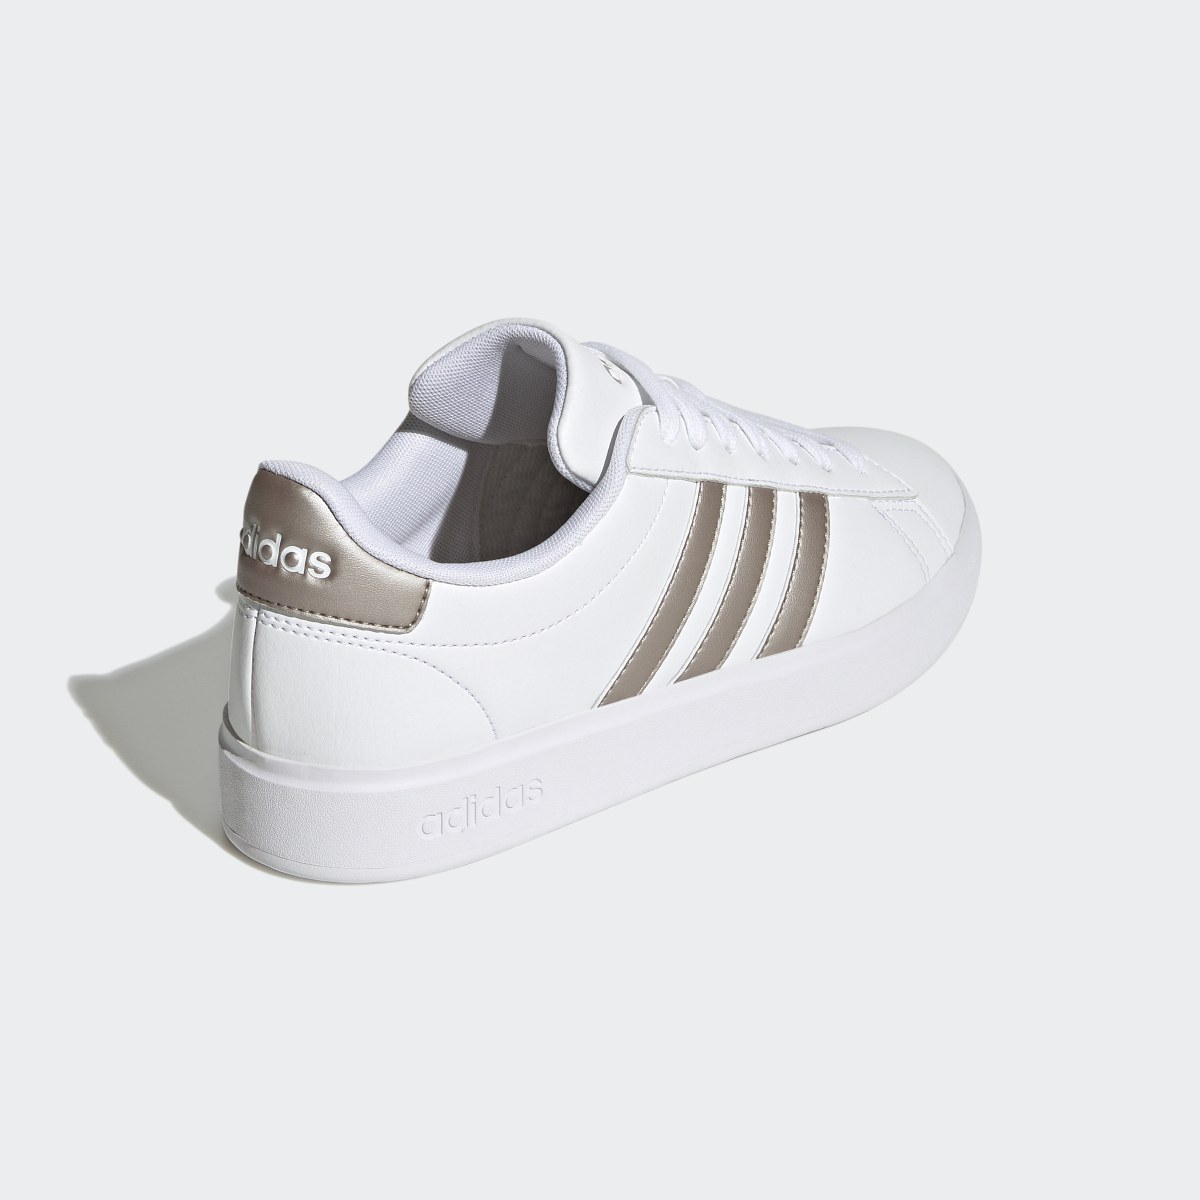 Adidas Grand Court Shoes. 6